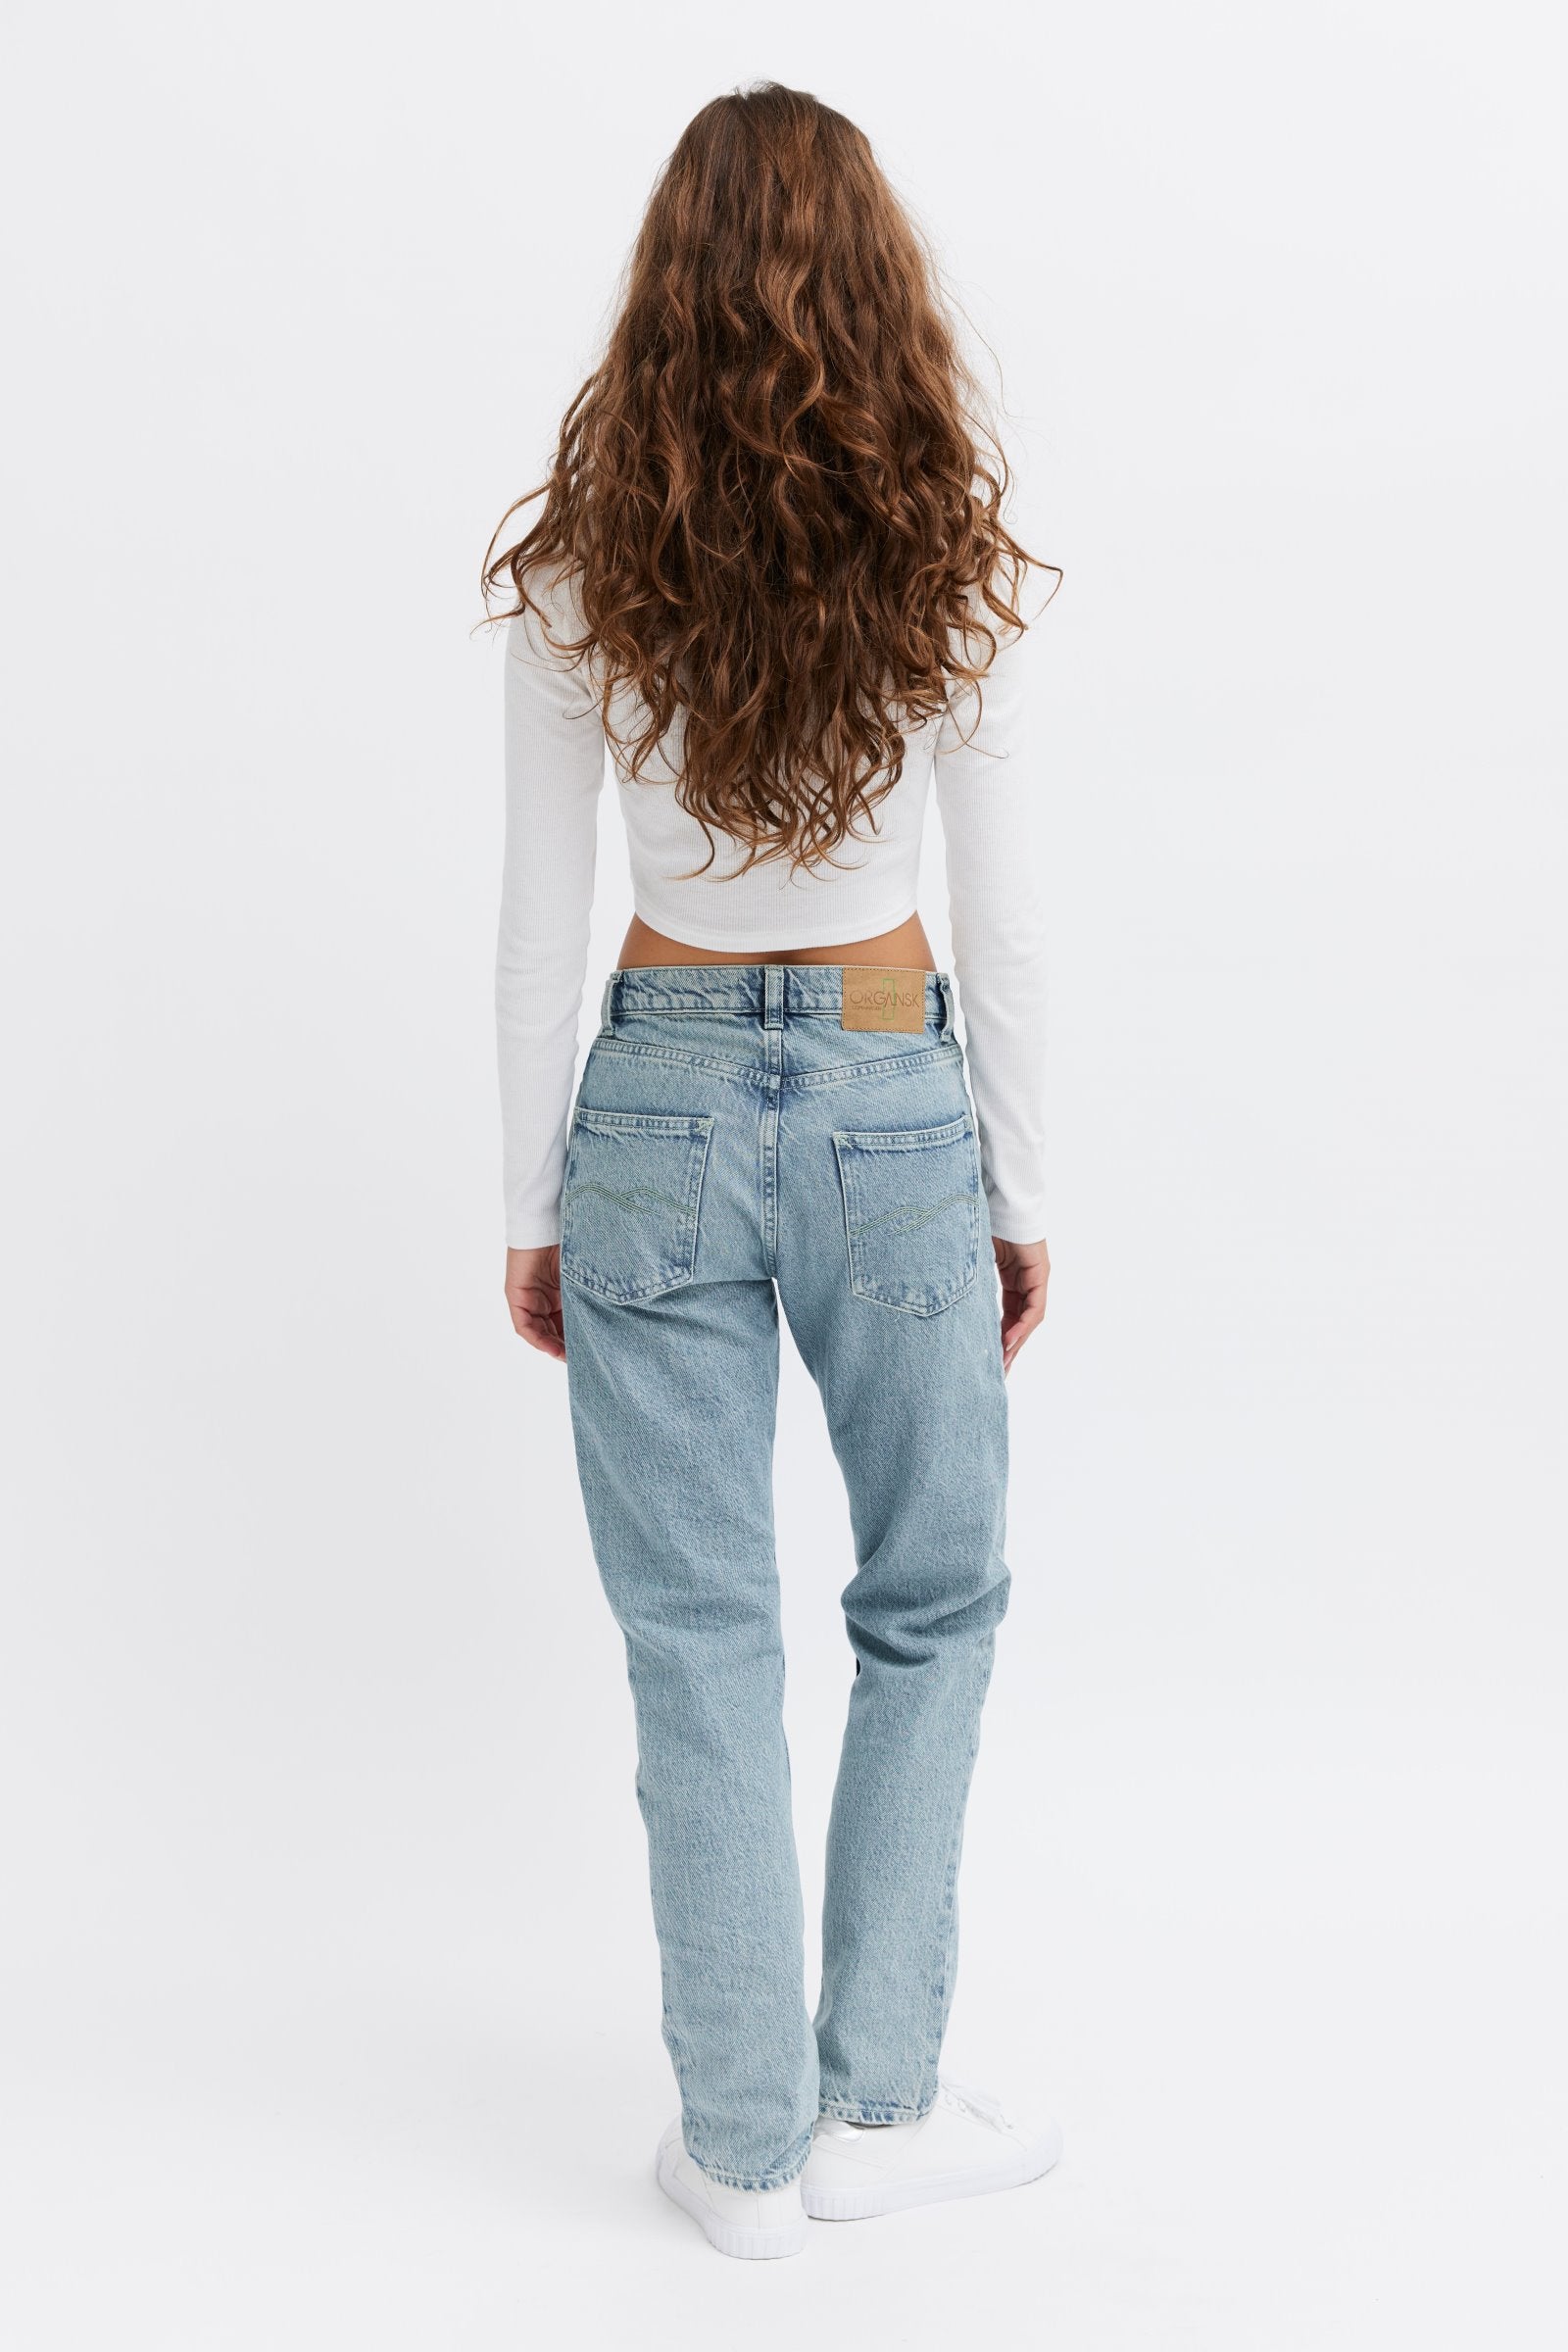 Best Eco-friendly Denim Jeans for women - 100% Organic - Ethically made